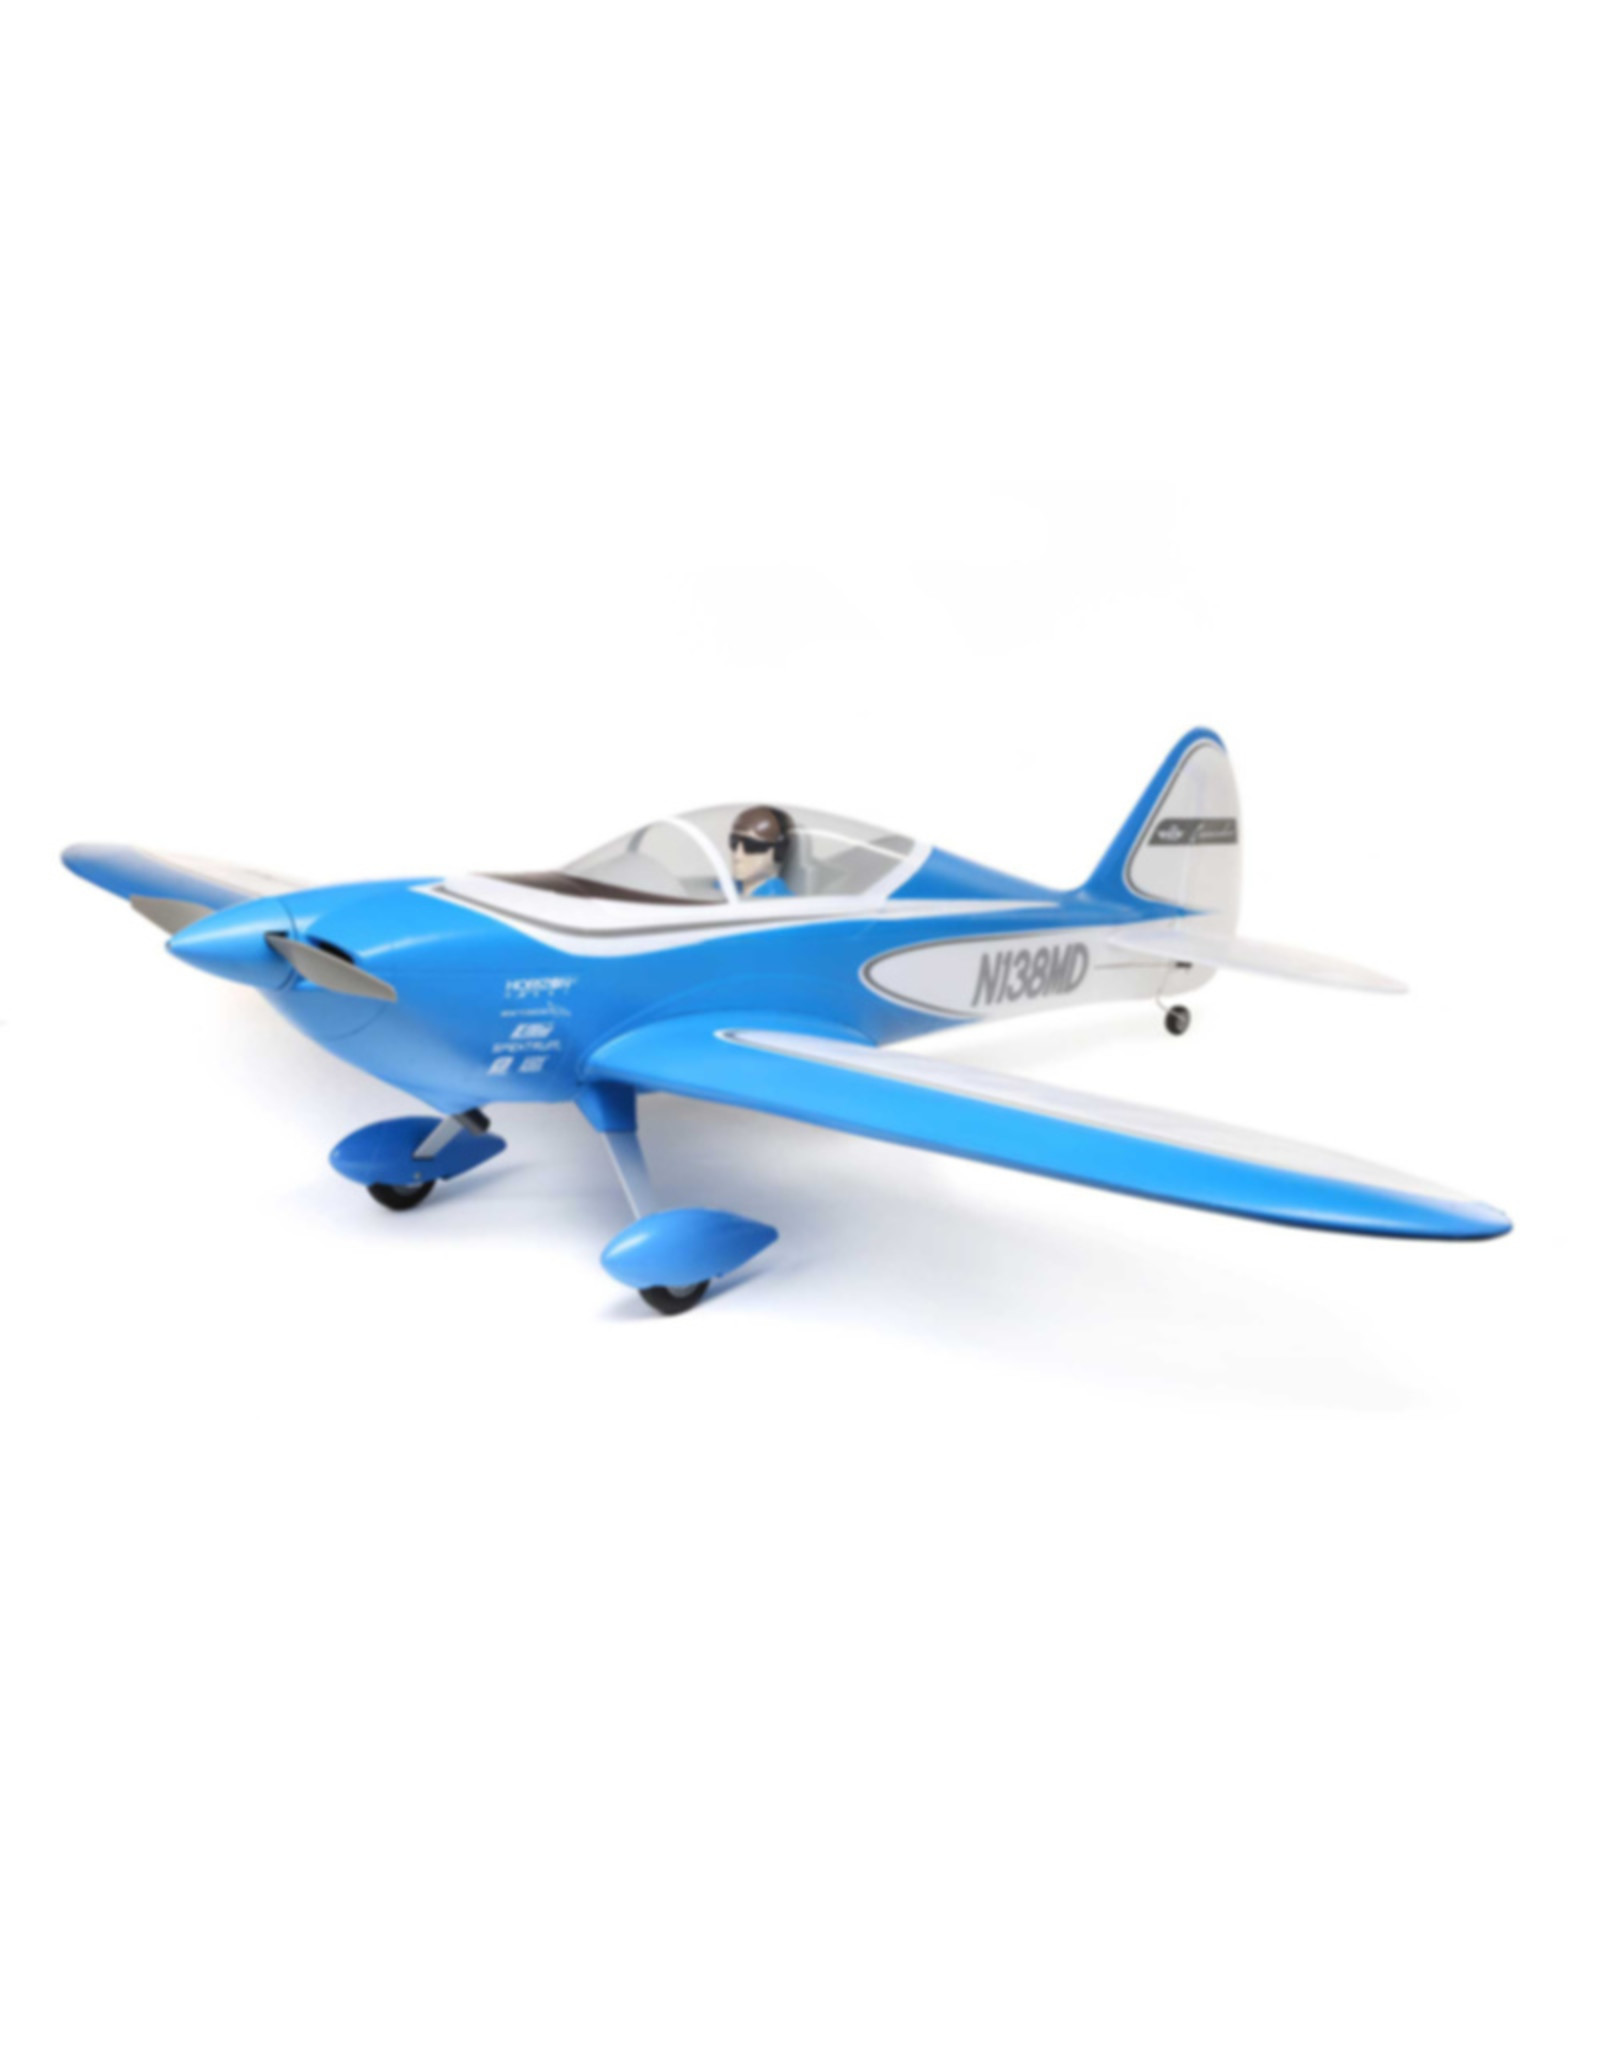 eflite EFL14850  Commander mPd 1.4m BNF Basic with AS3X & SAFE Select